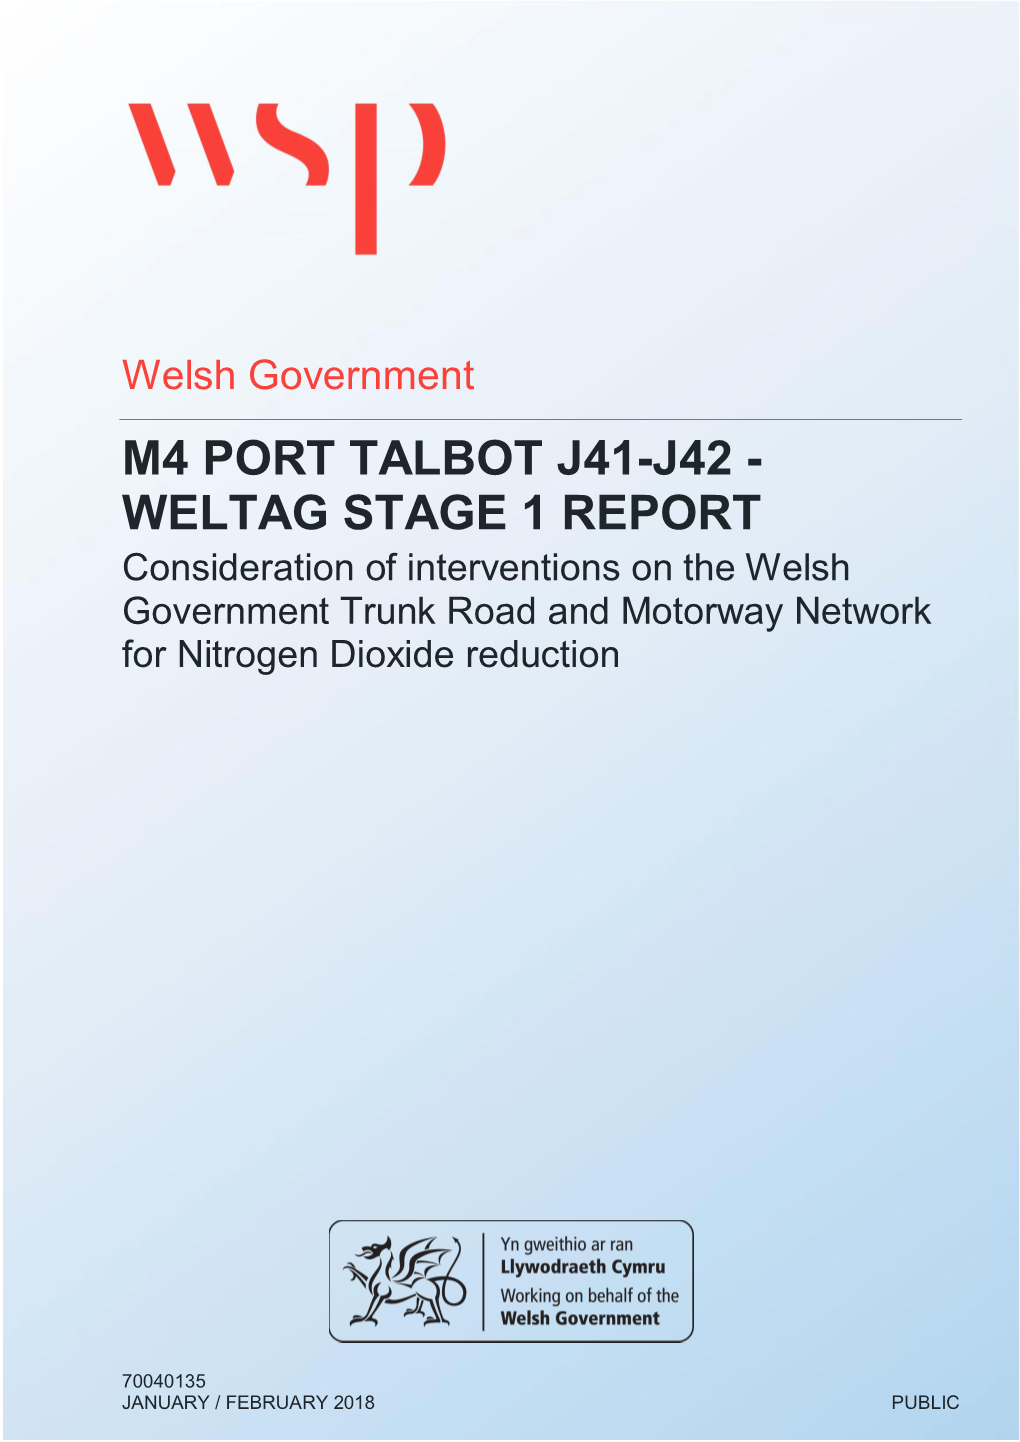 M4 PORT TALBOT J41-J42 - WELTAG STAGE 1 REPORT Consideration of Interventions on the Welsh Government Trunk Road and Motorway Network for Nitrogen Dioxide Reduction